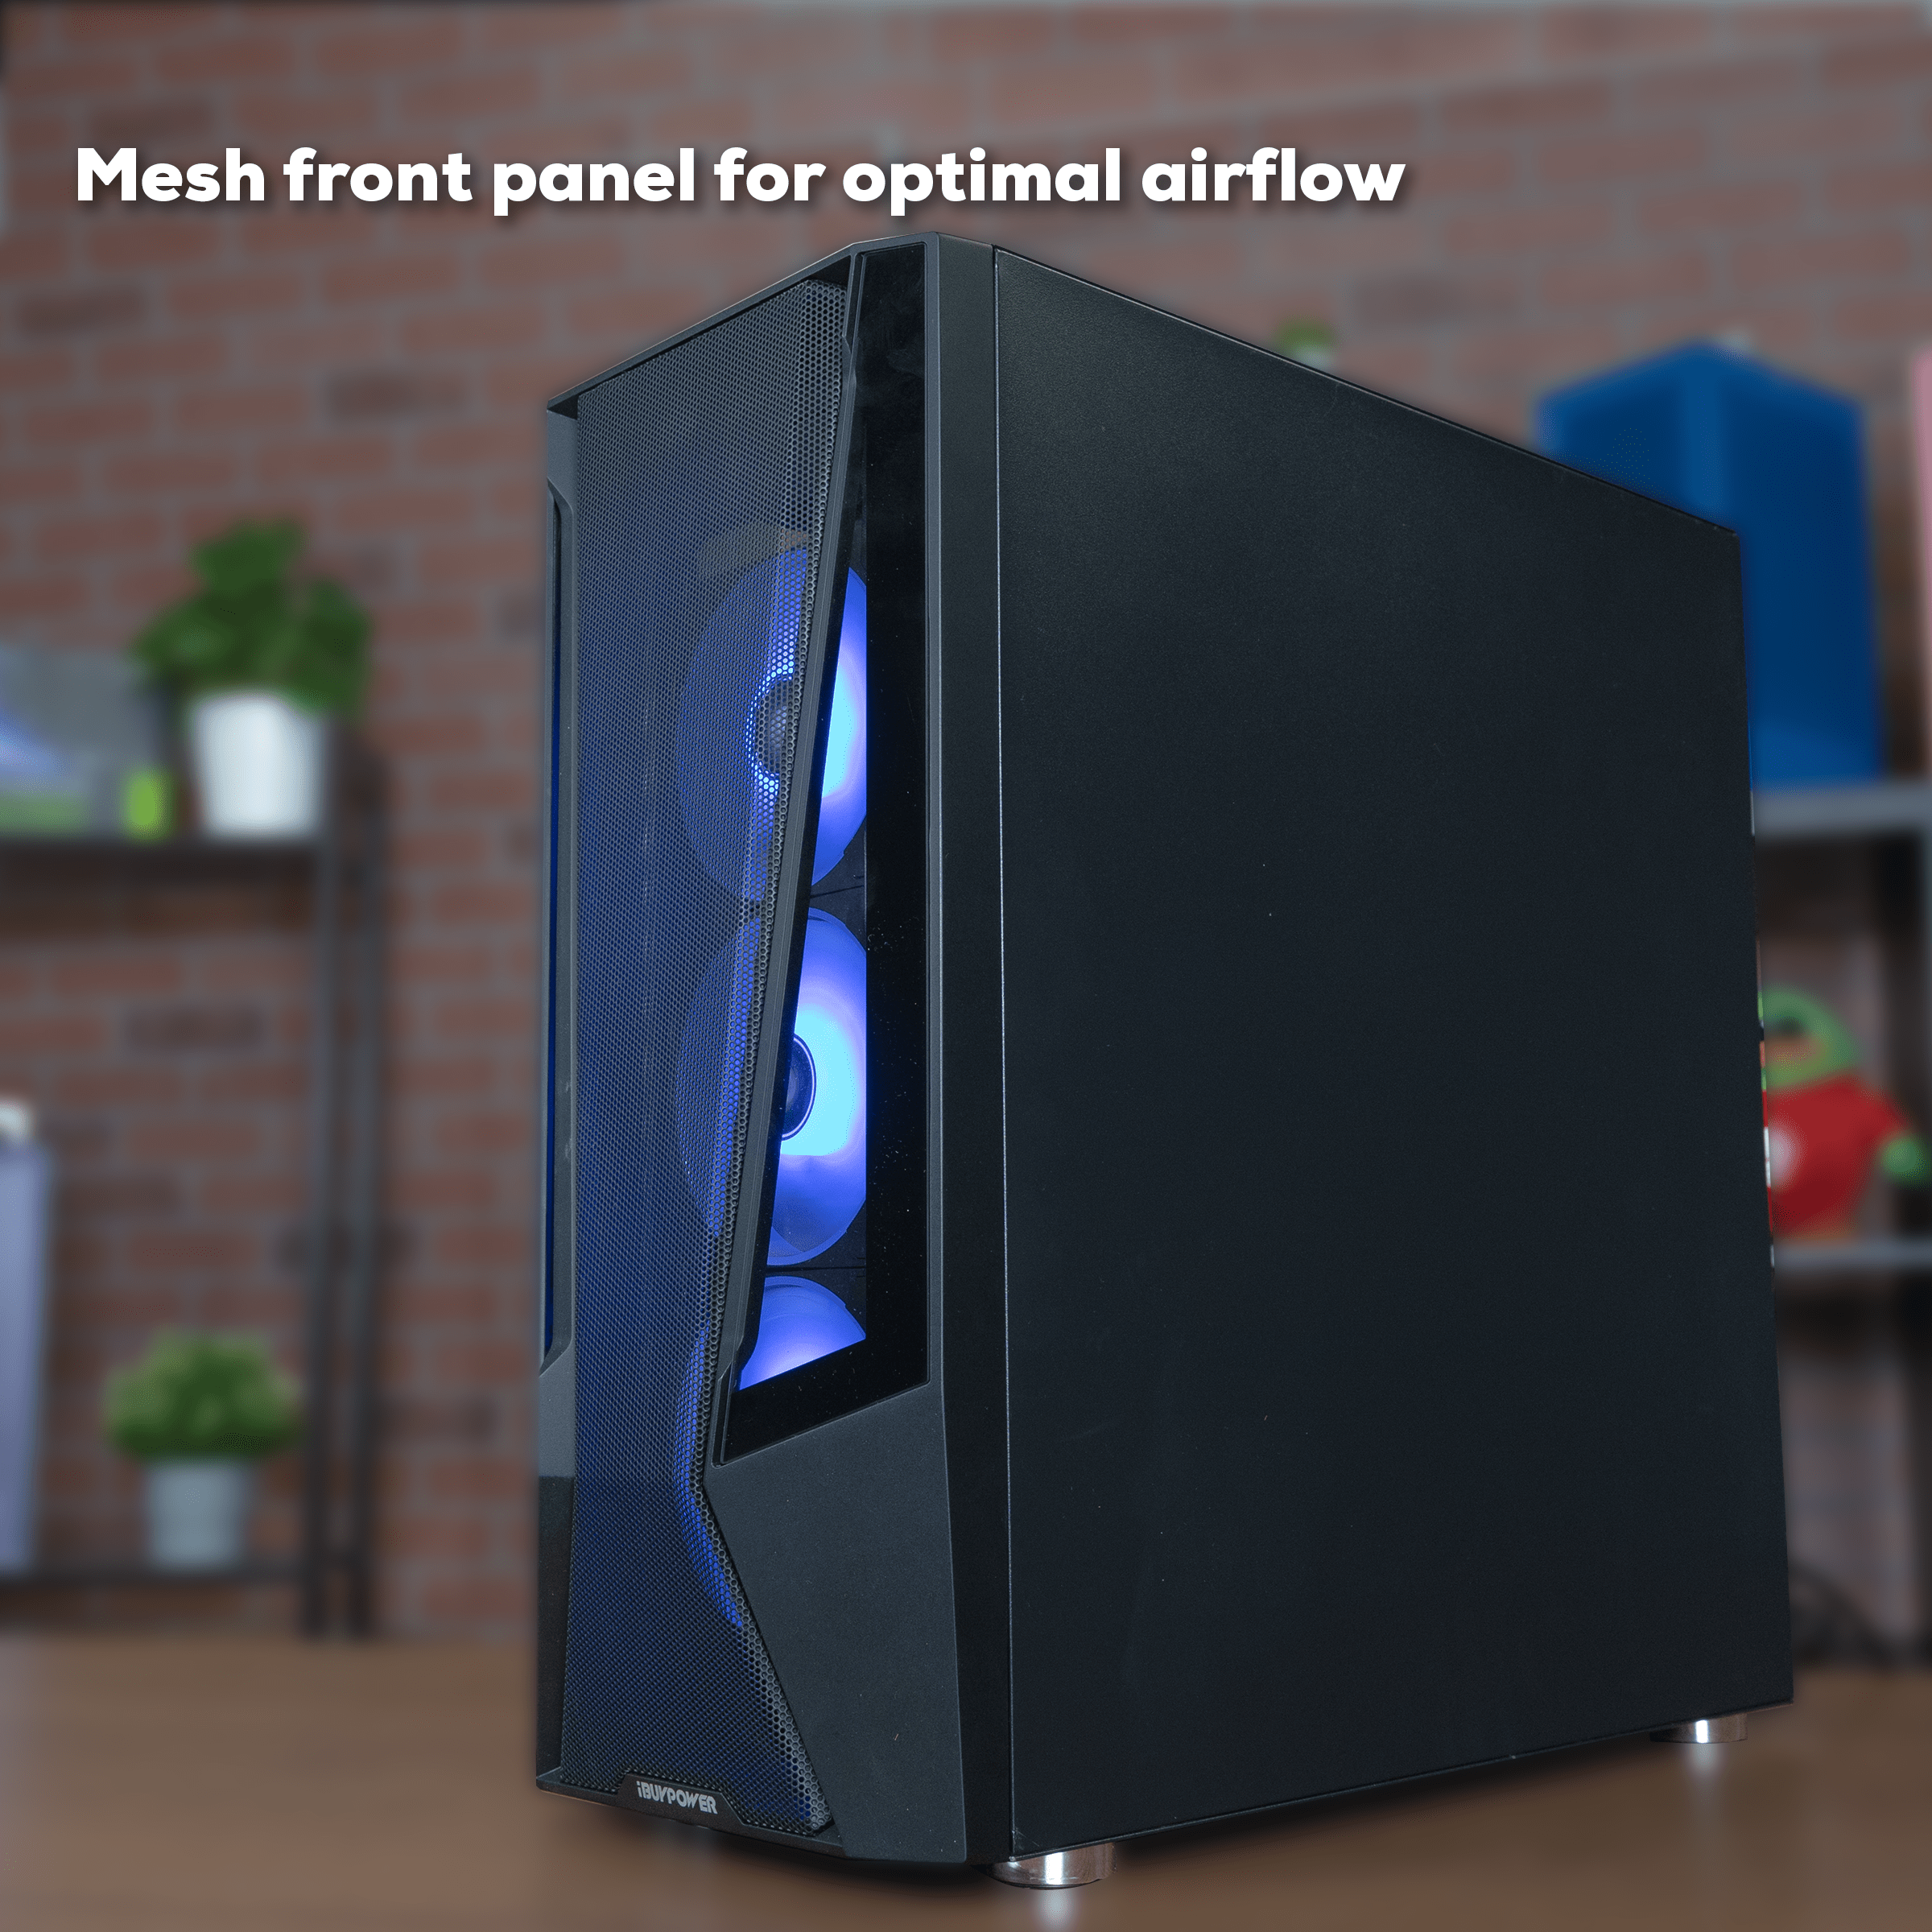 https://content.ibuypower.com/cdn-cgi/image/width=3840,format=auto,quality=75/https://content.ibuypower.com/Images/Components/27217/gaming-pc-10-Trace7mesh-lifestyle-2400.png?v=1099254b7f97ce984b8ed549a7337c90c5fcaf14